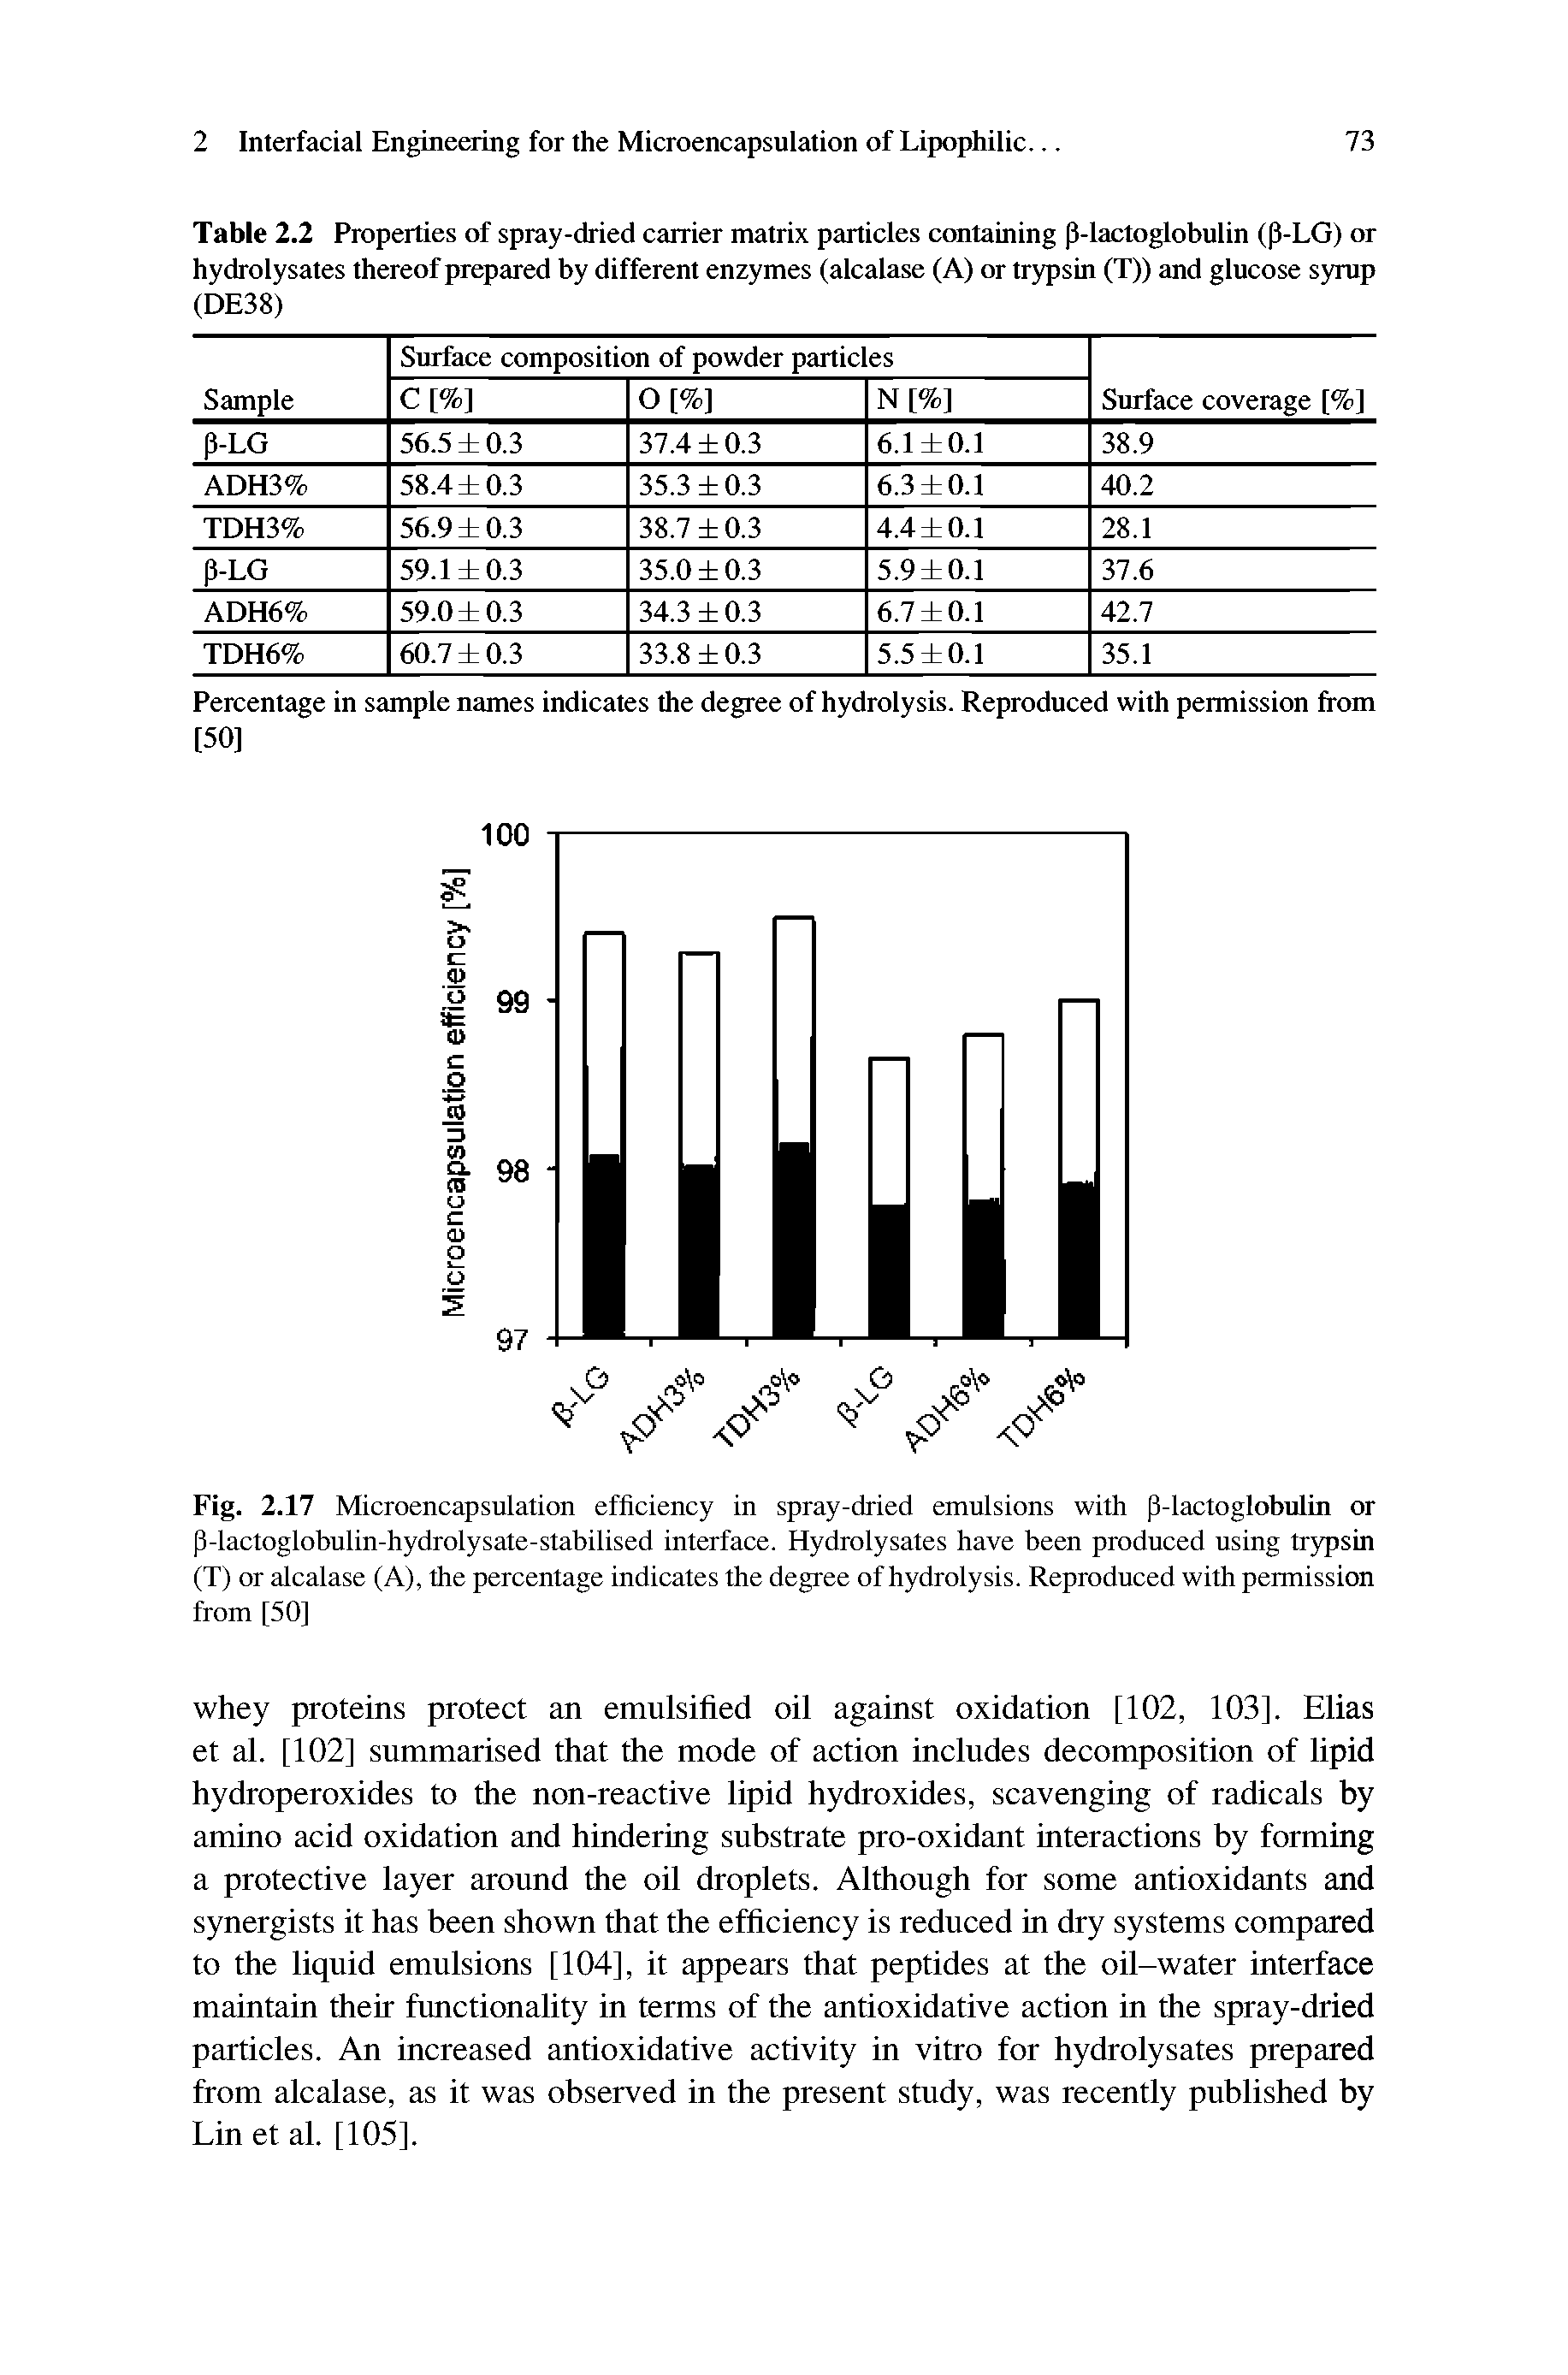 Fig. 2.17 Microencapsulation efficiency in spray-dried emulsions with p-lactoglobulin or P-lactoglobulin-hydrolysate-stabilised interface. Hydrolysates have been produced using trypsin (T) or alcalase (A), the percentage indicates the degree of hydrolysis. Reproduced with permission from [50]...